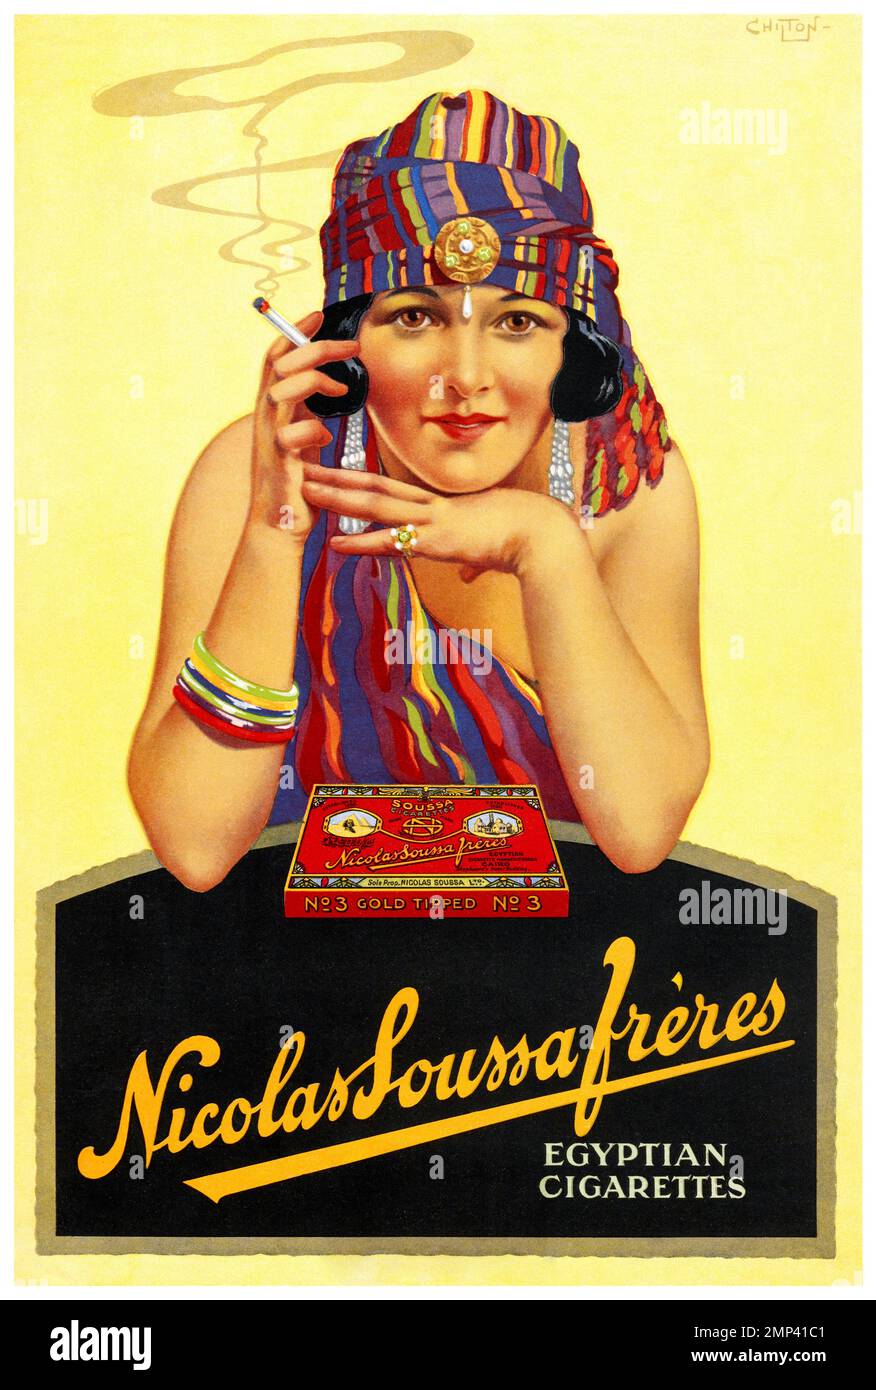 Nicolas Soussa Frères. Egyptian Cigarettes by Chilton (dates unknown). Poster published in 1915 in the UK. Stock Photo